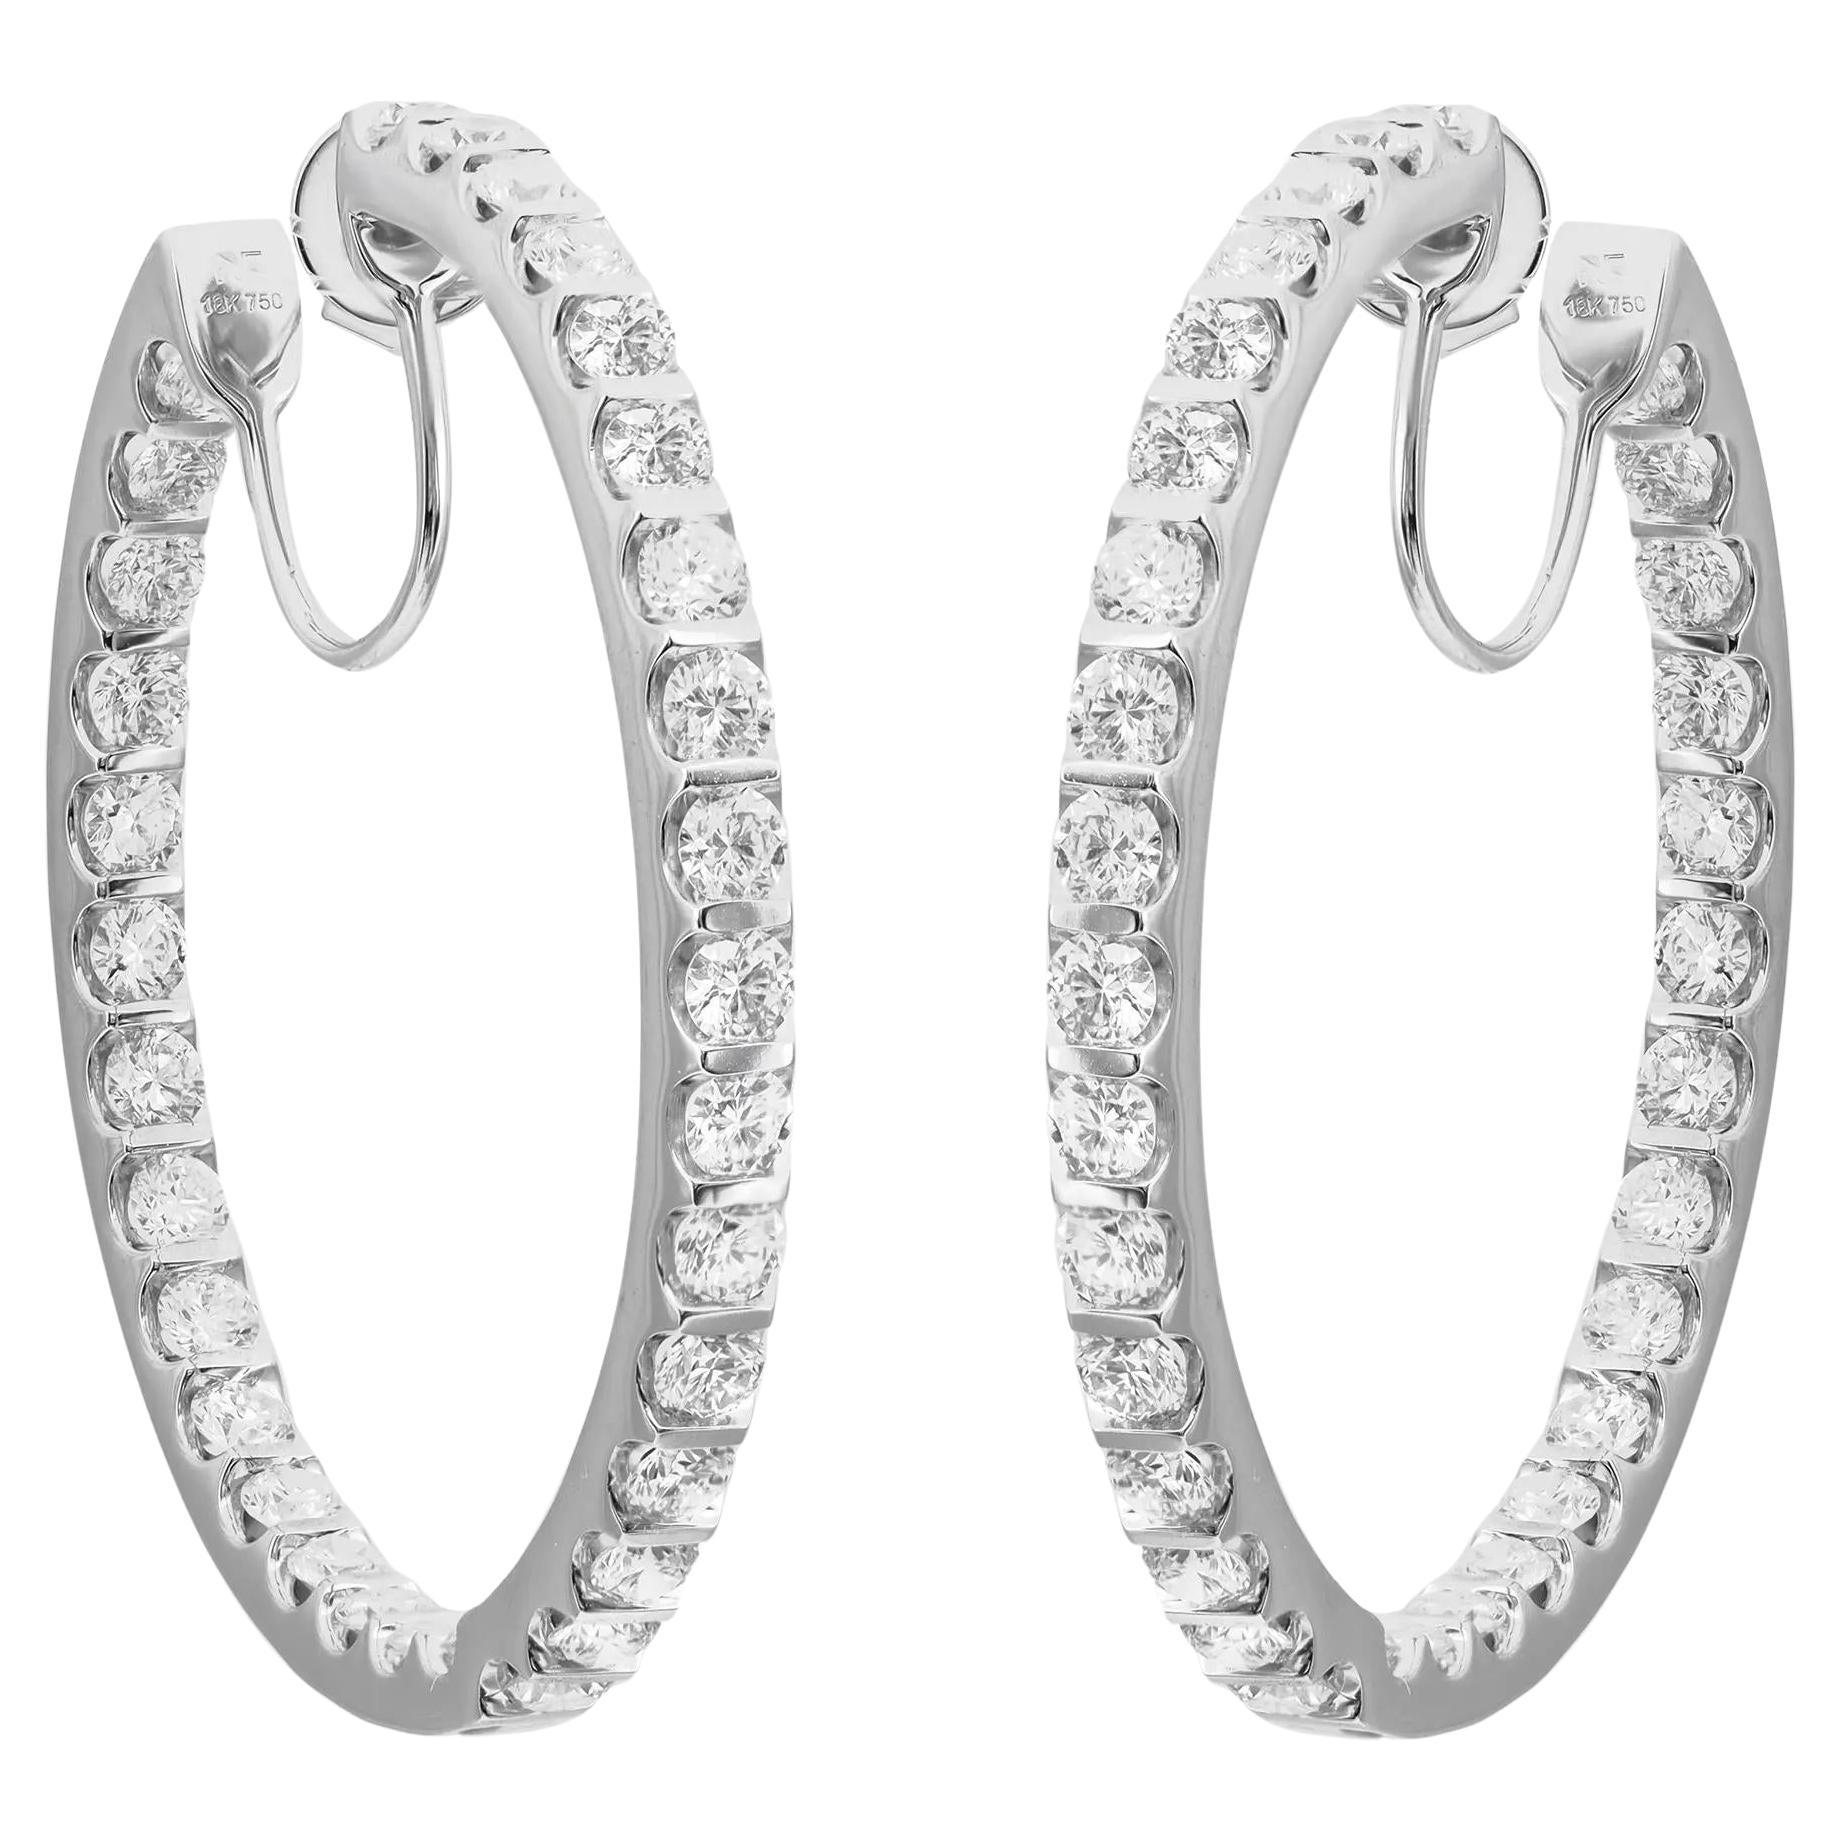 Inside Out Round Cut Diamond Hoop Earrings 18K White Gold 4.76Cttw 1.5 Inches For Sale